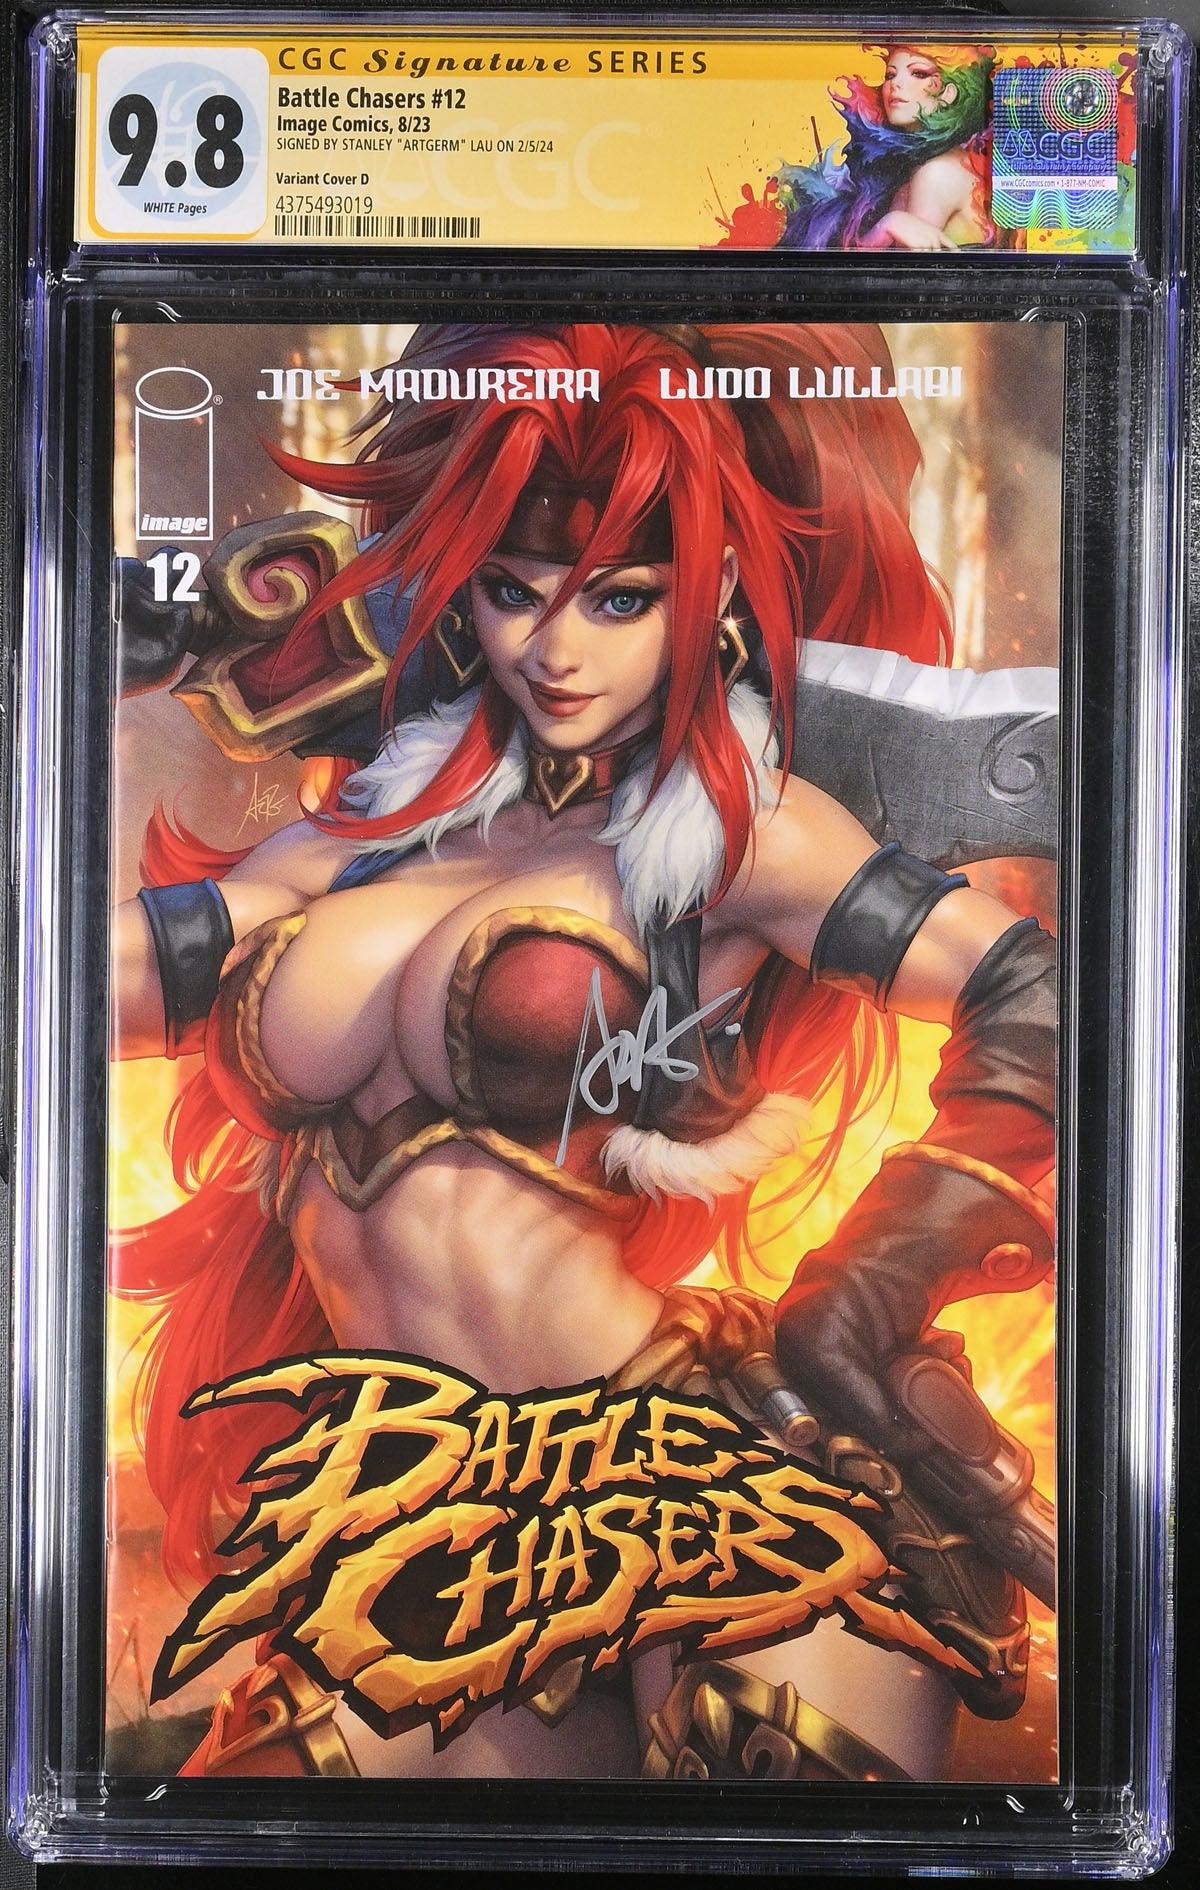 CGC BATTLE CHASERS #12 COVER D LAU VARIANT (9.8) SIGNATURE SERIES - SIGNED BY STANLEY "ARTGERM" - Kings Comics